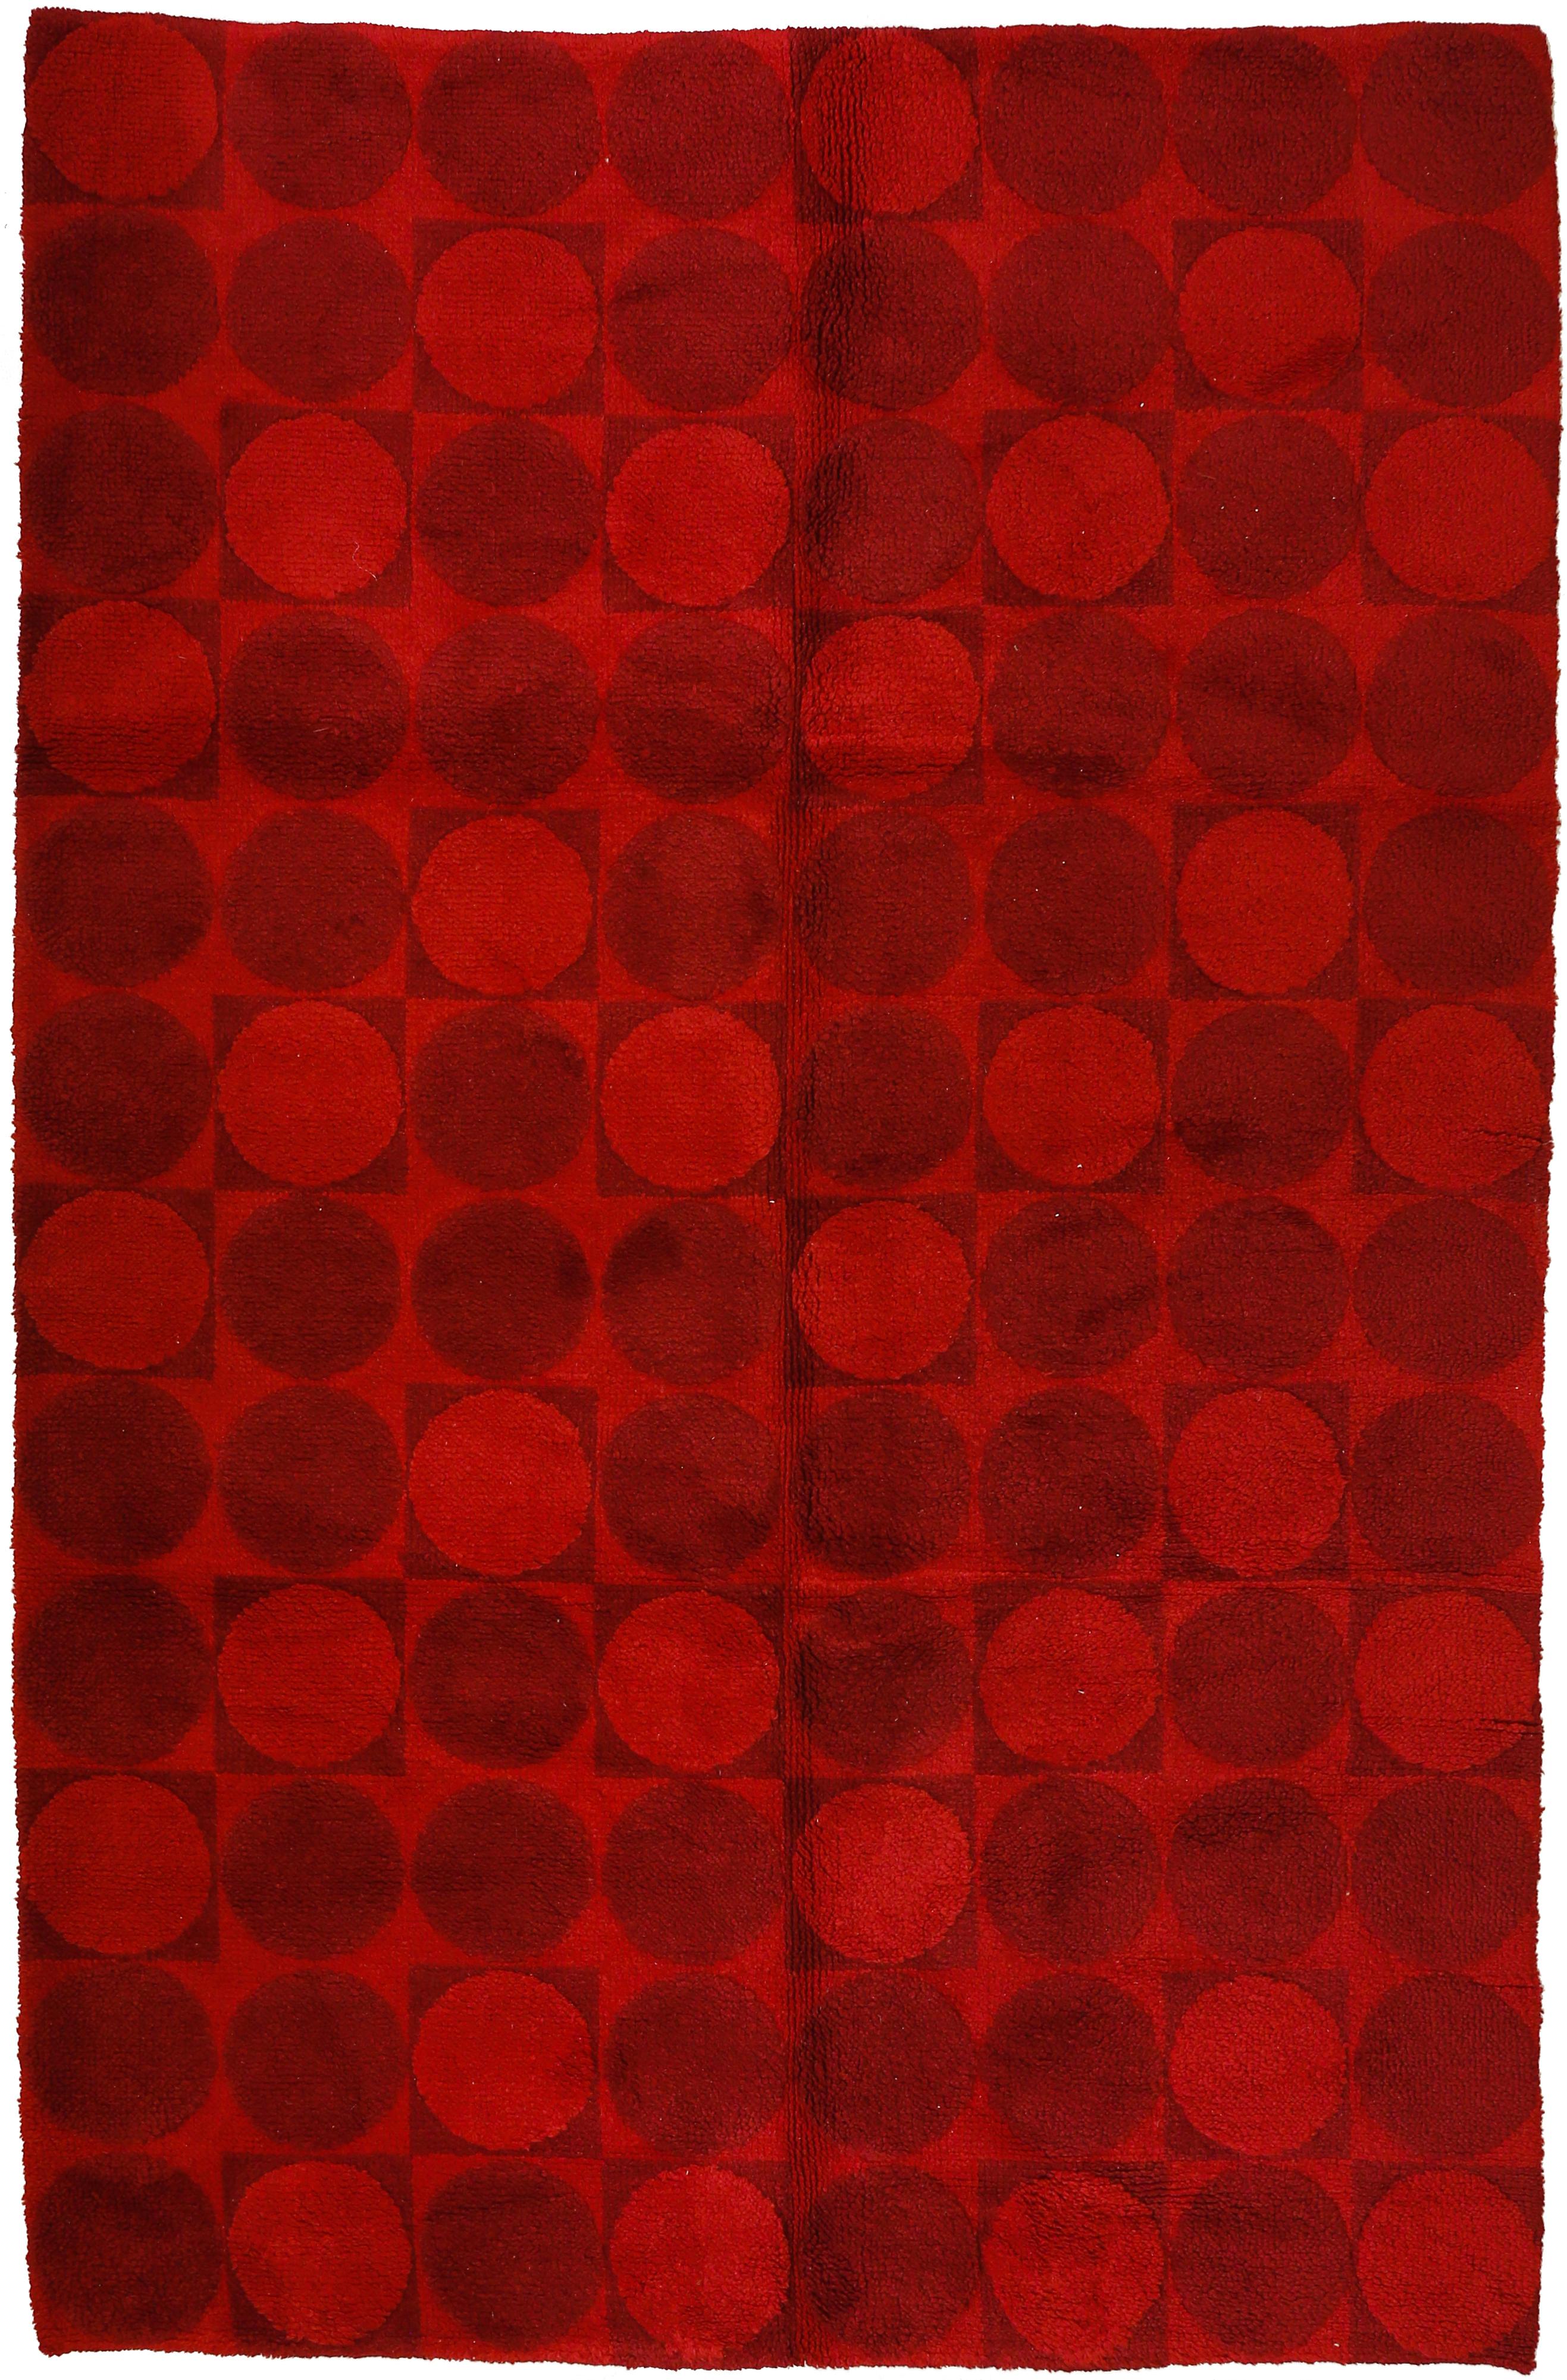 An unusual hand-knotted carpet woven in two tones of red, with an all-over pattern of perfectly executed roundels. Patterns such as this one were clearly influenced by Op-Art designers such as Verner Panton, who created an entire collection based on